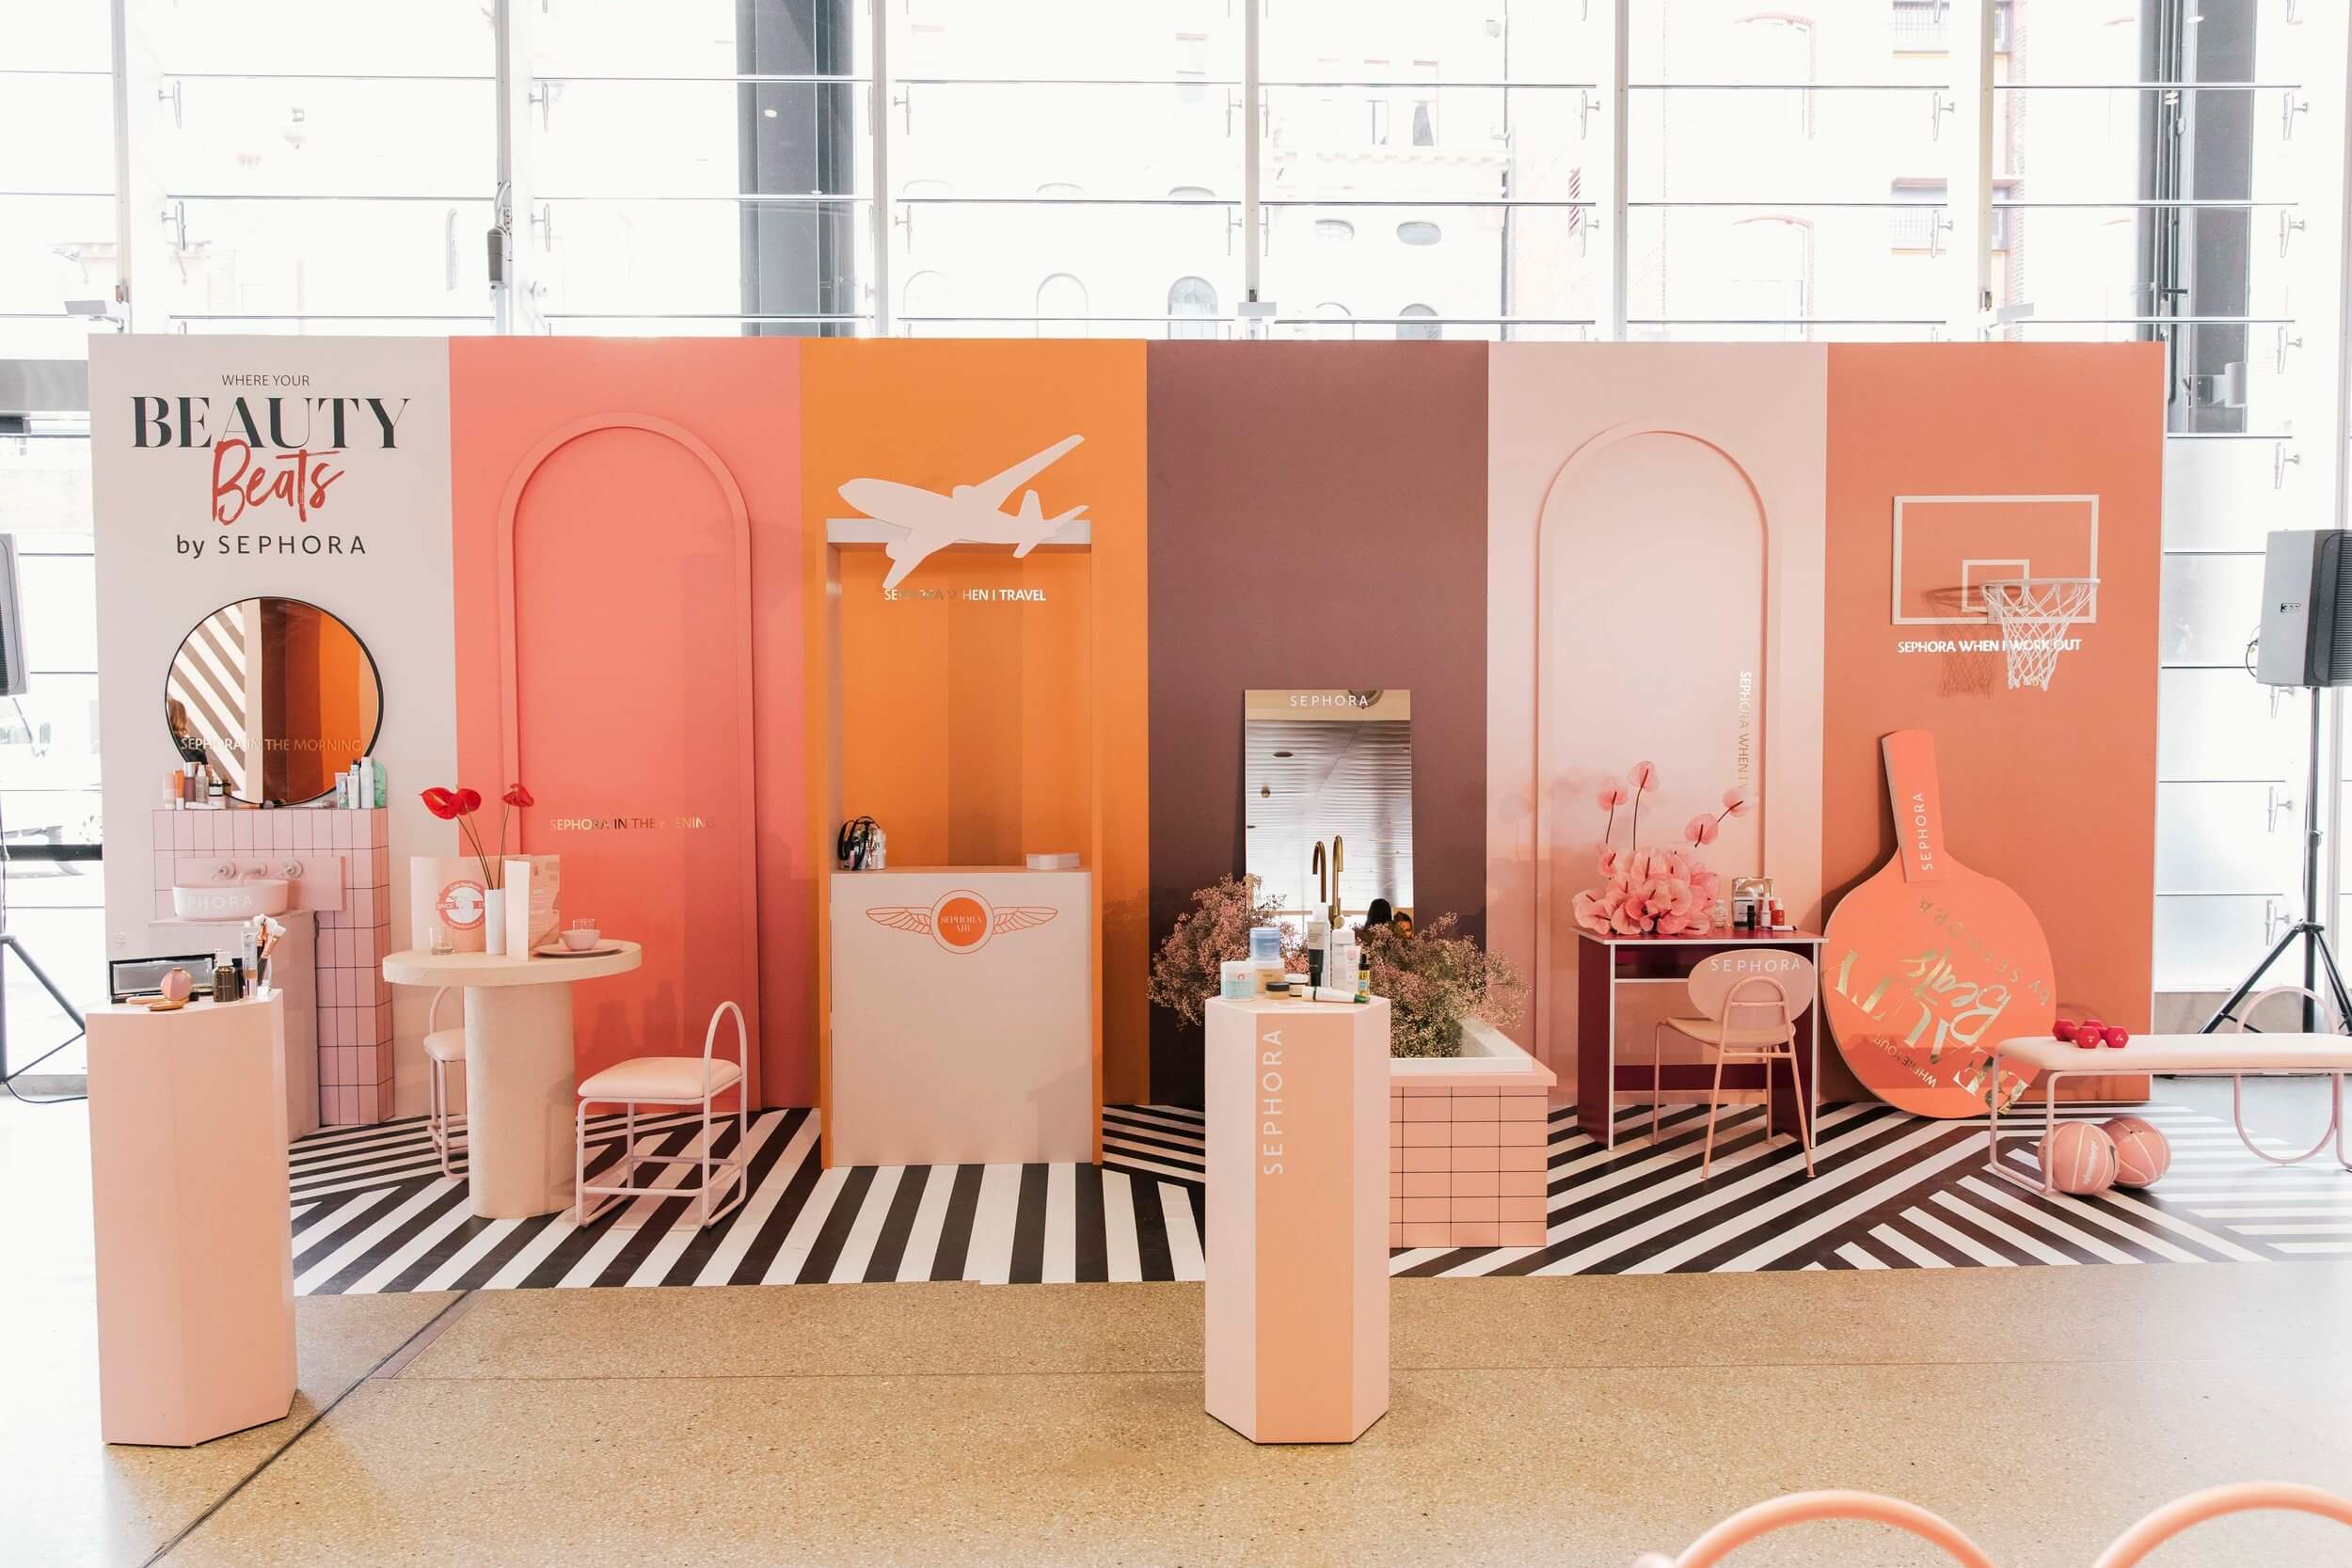 6 Creative Trade Show Displays to Inspire You